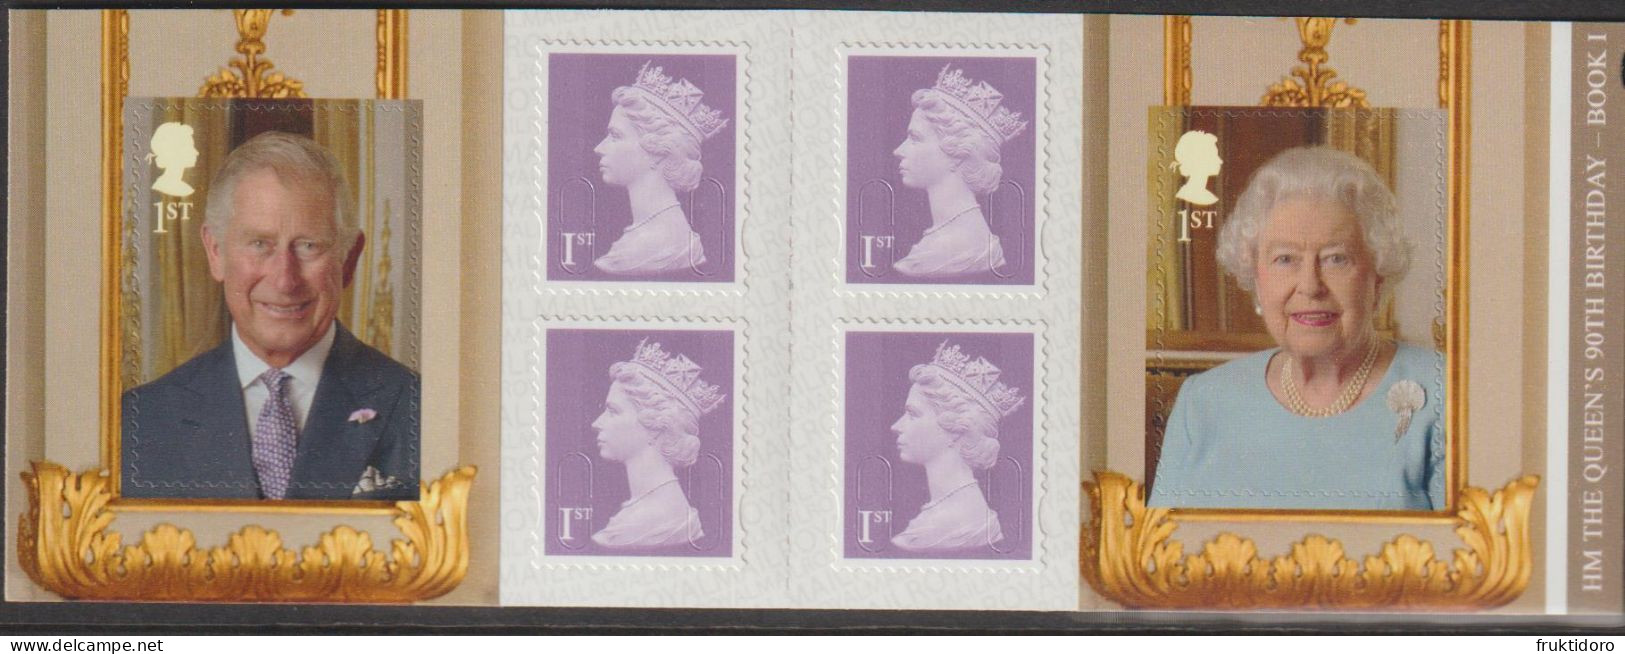 United Kingdom Mi MH0-374 The Queen’s 90th Birthday - Queen Elizabeth II - Prince Charles 2016 ** - Unused Stamps